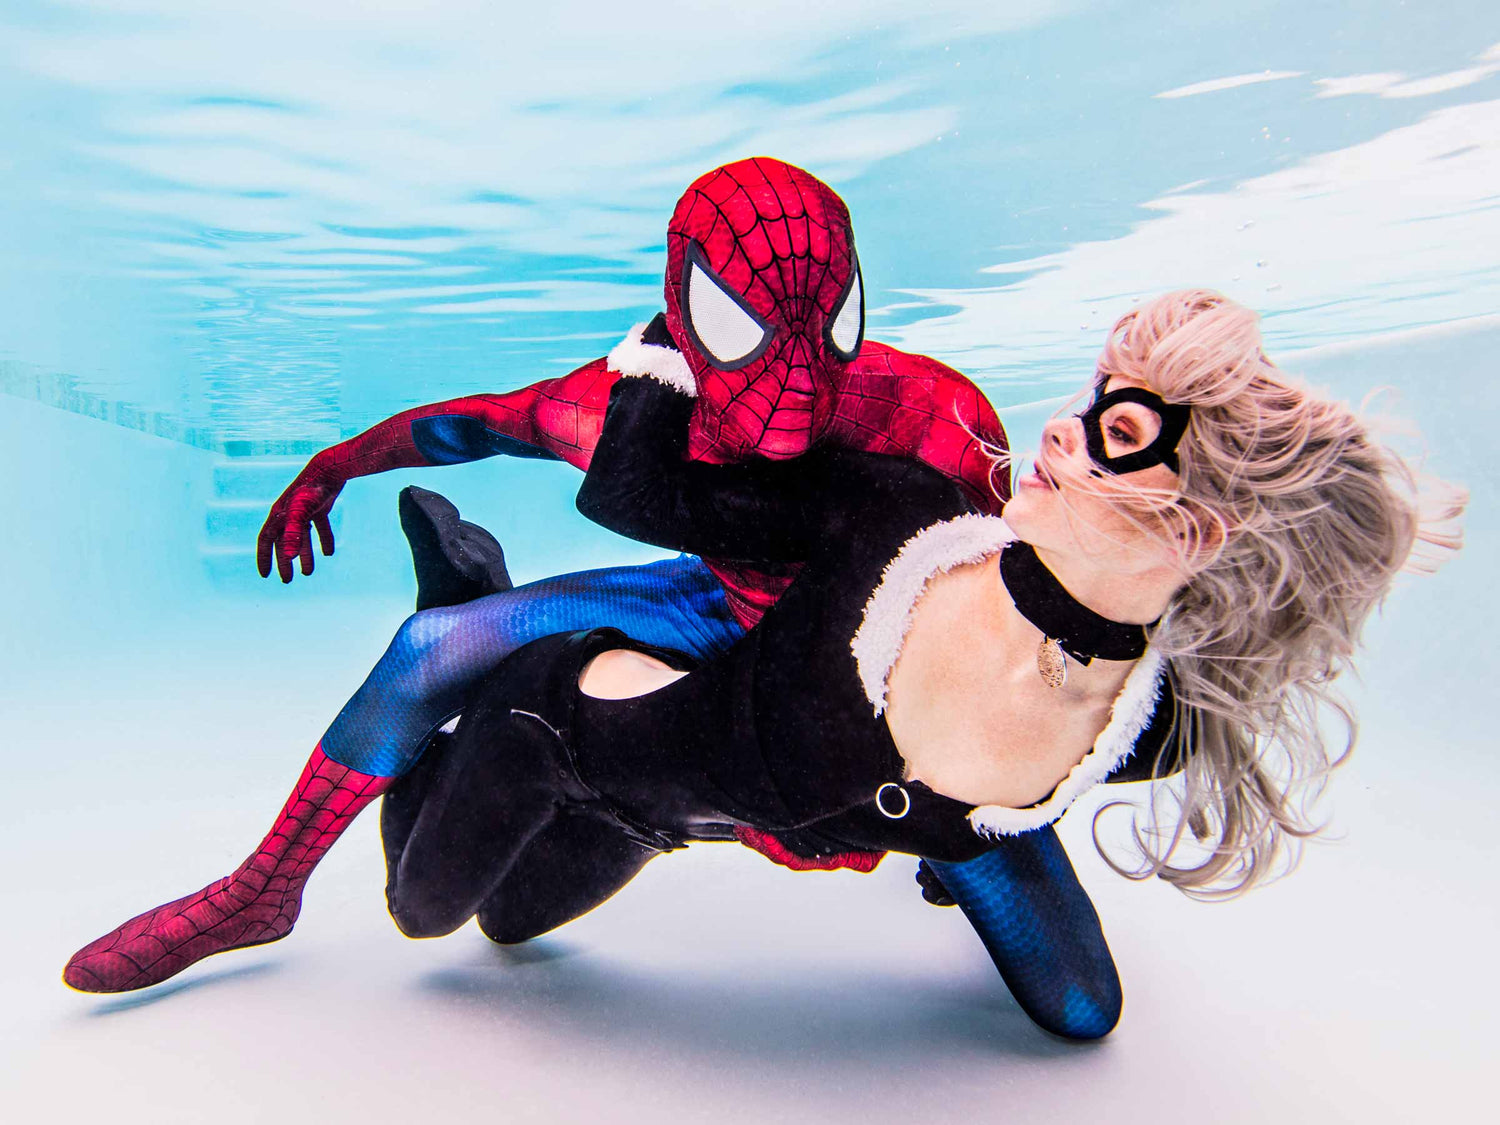 How to Photograph Superheroes Underwater